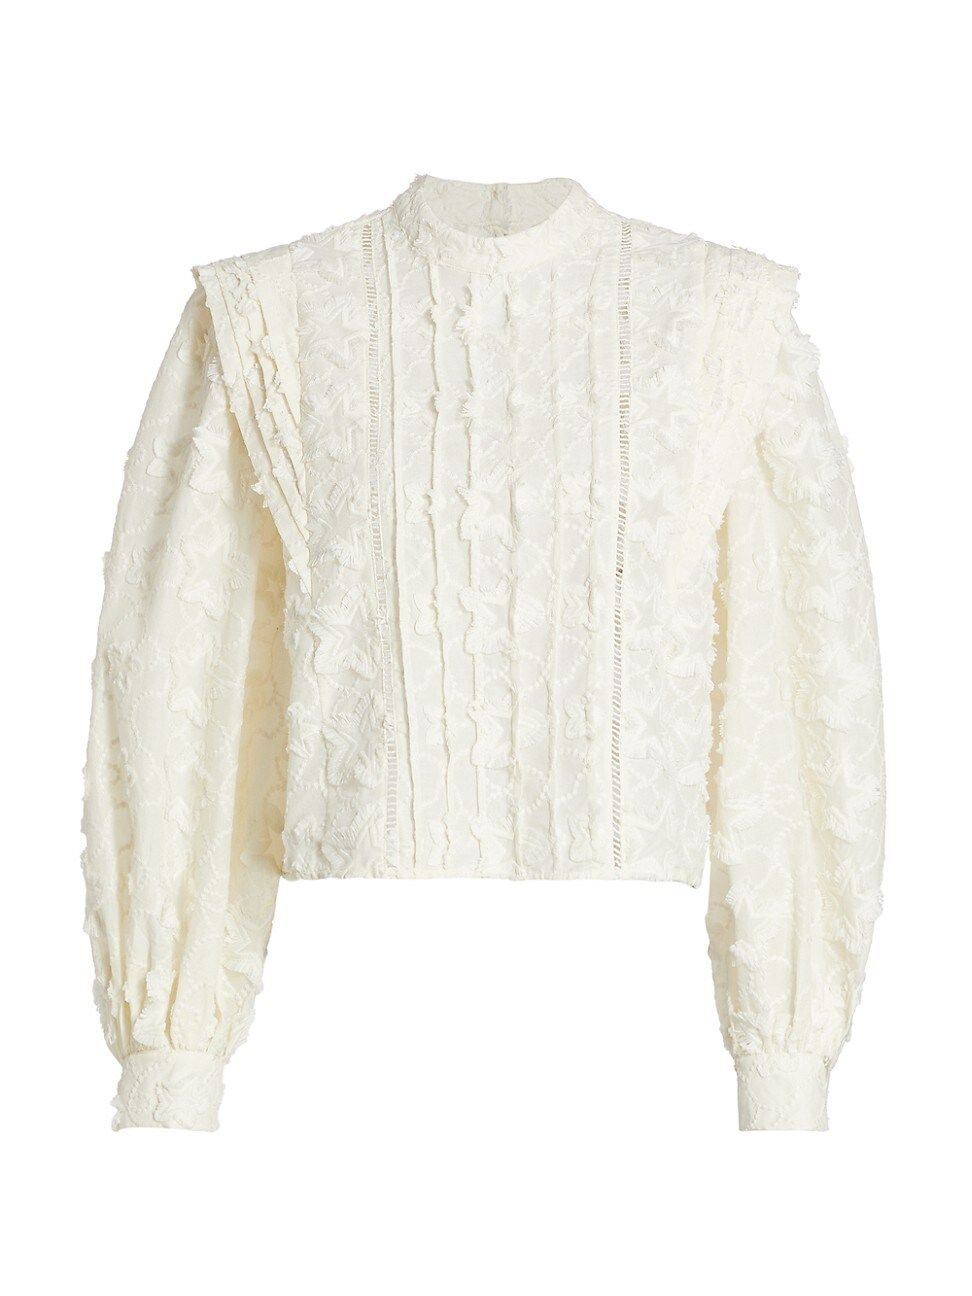 Women's Embroidered Star Blouse - Off White - Size Medium | Saks Fifth Avenue